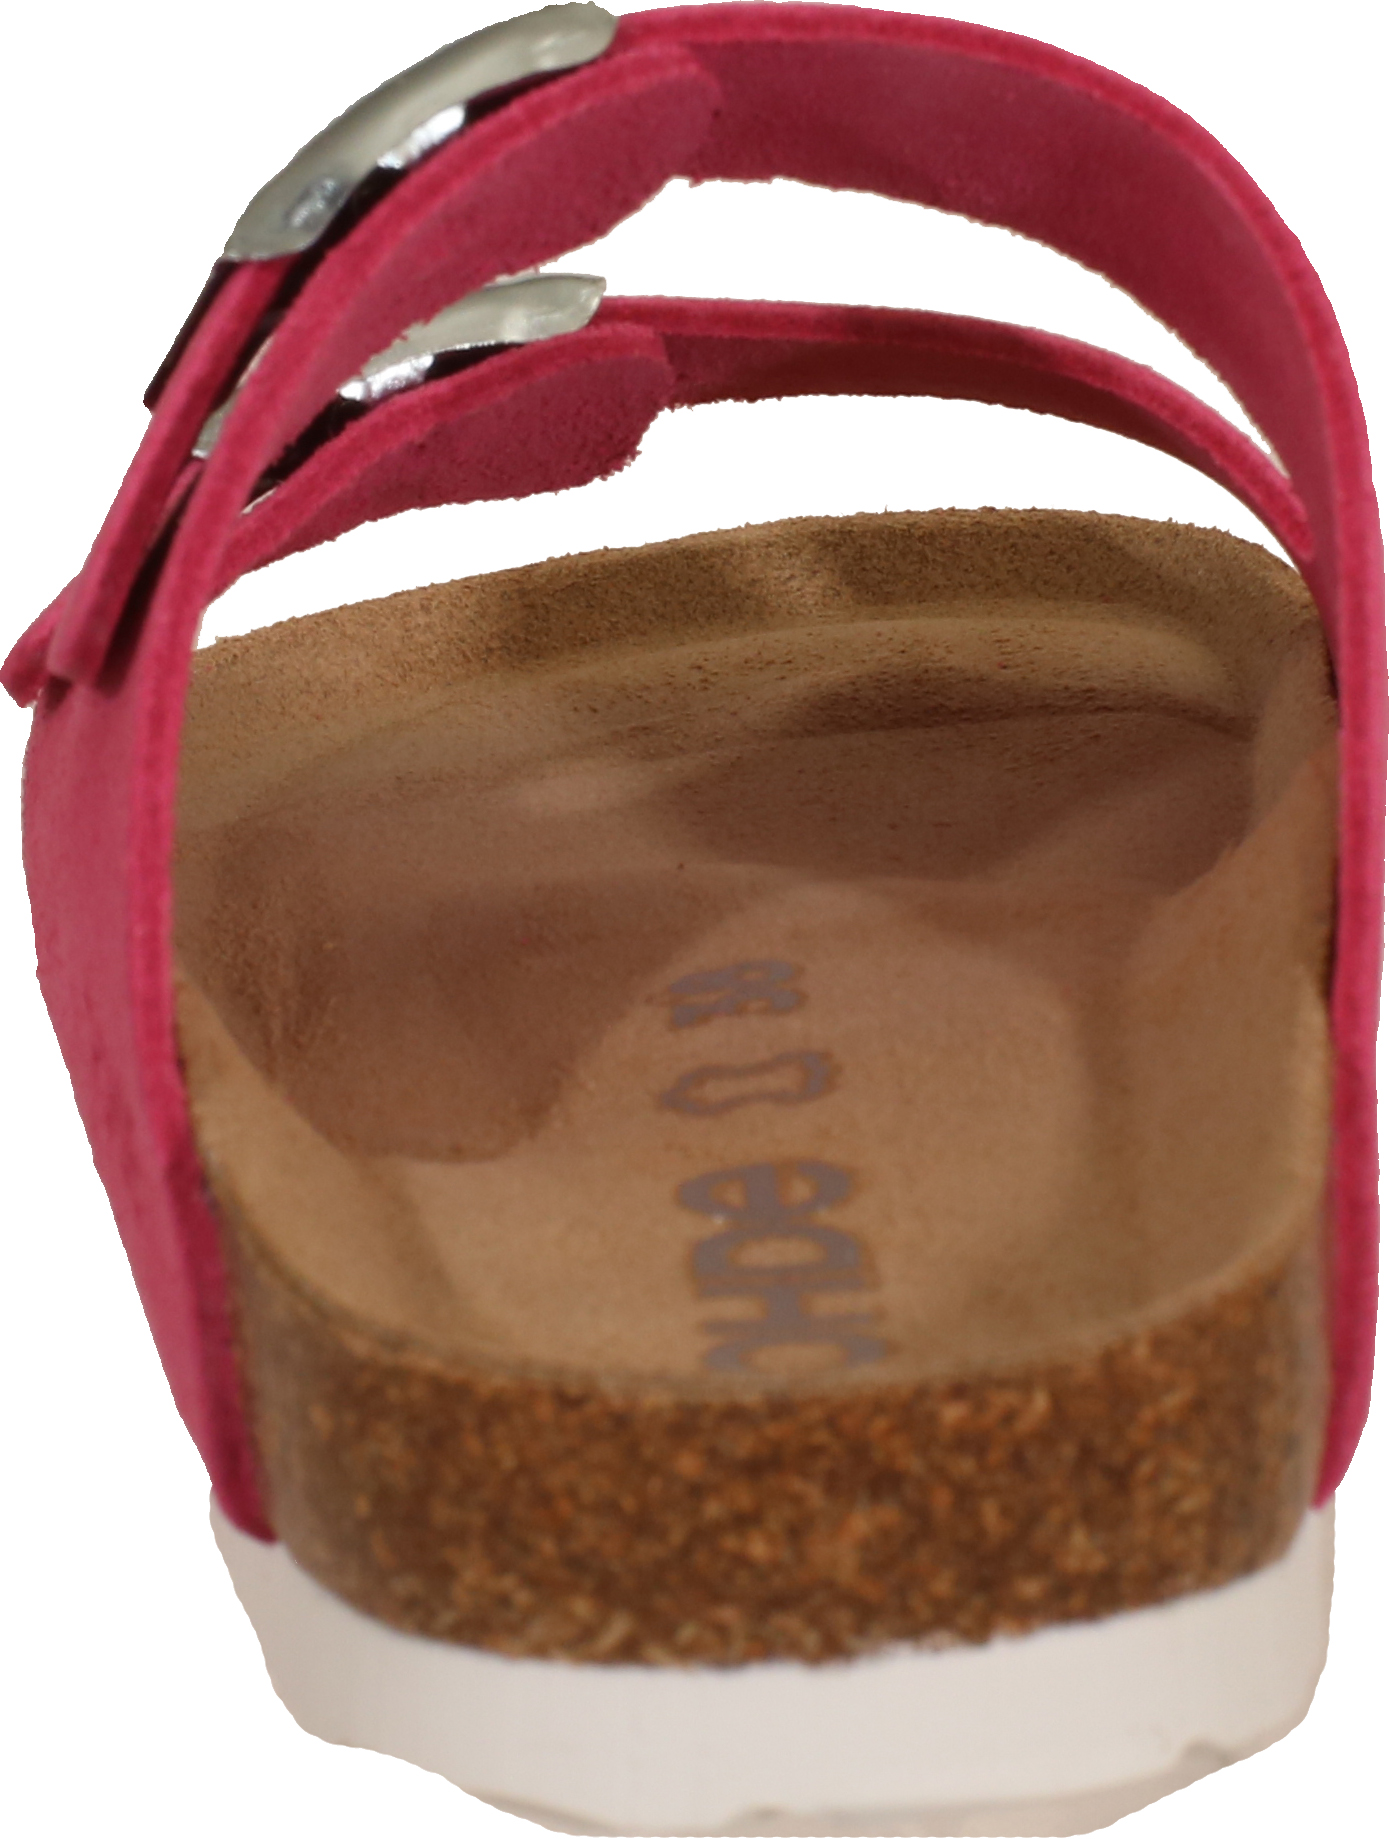 Sunnys N12 - Pink suede leather